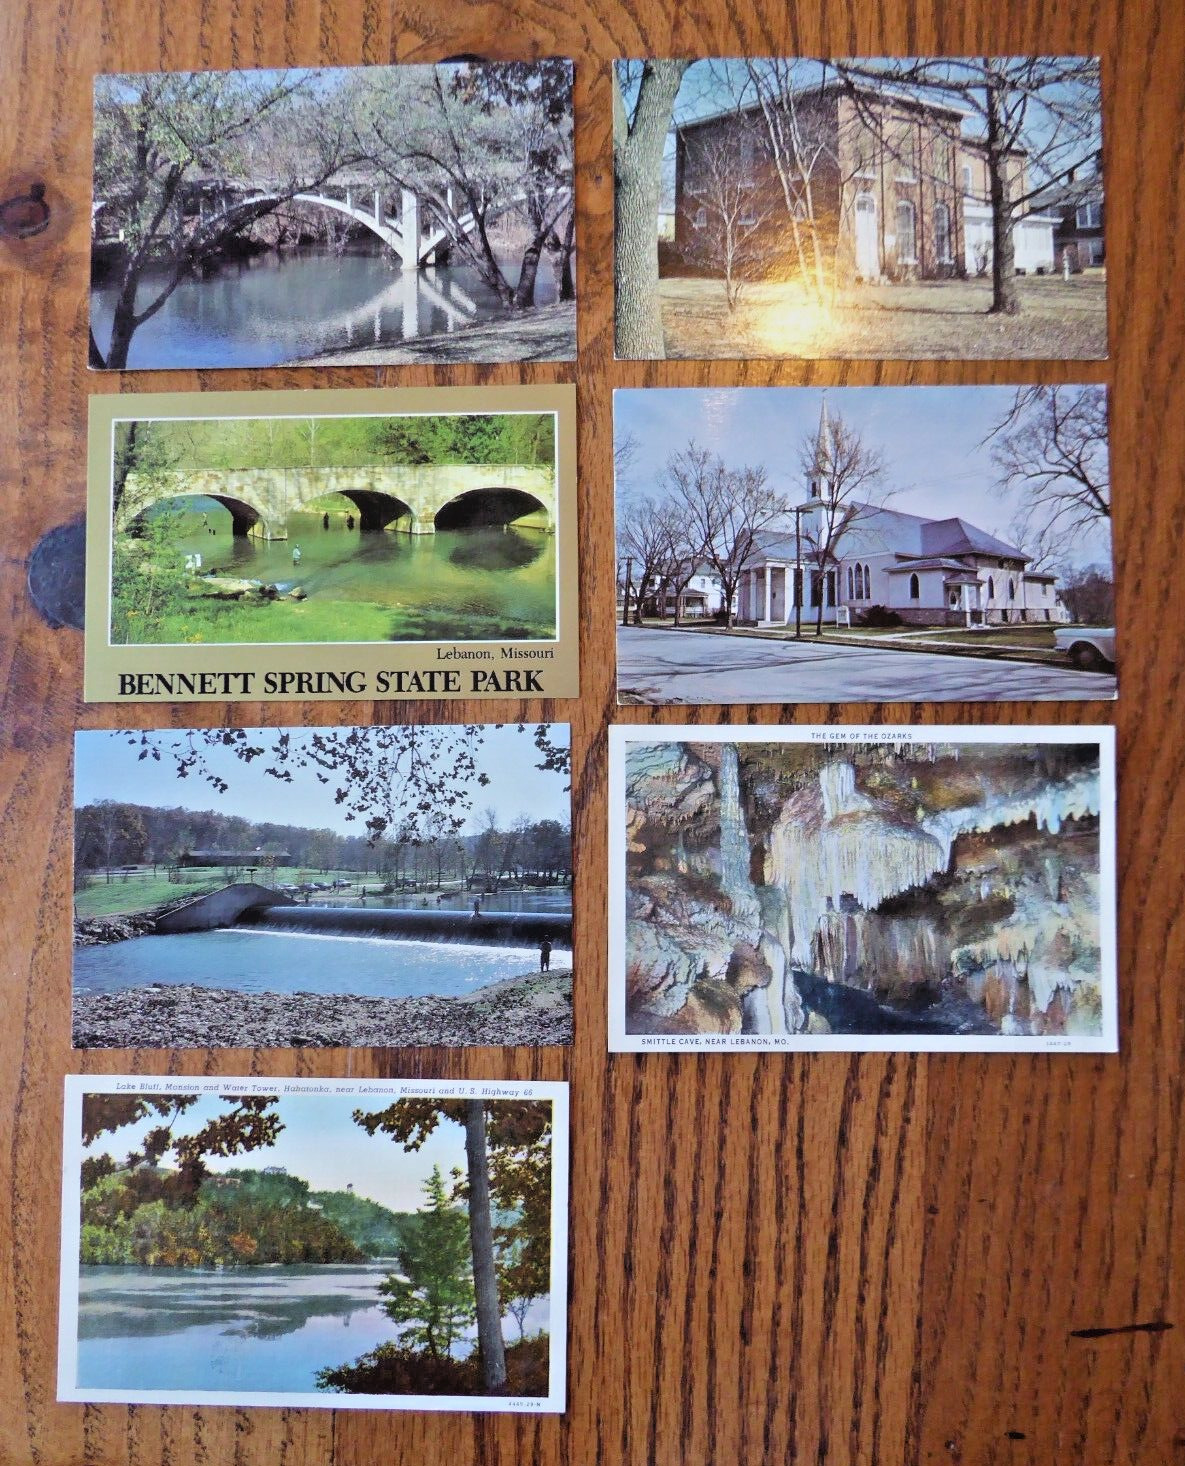 Lot of 7 Vintage Unposted Postcards from Lebanon Laclede County Missouri MO